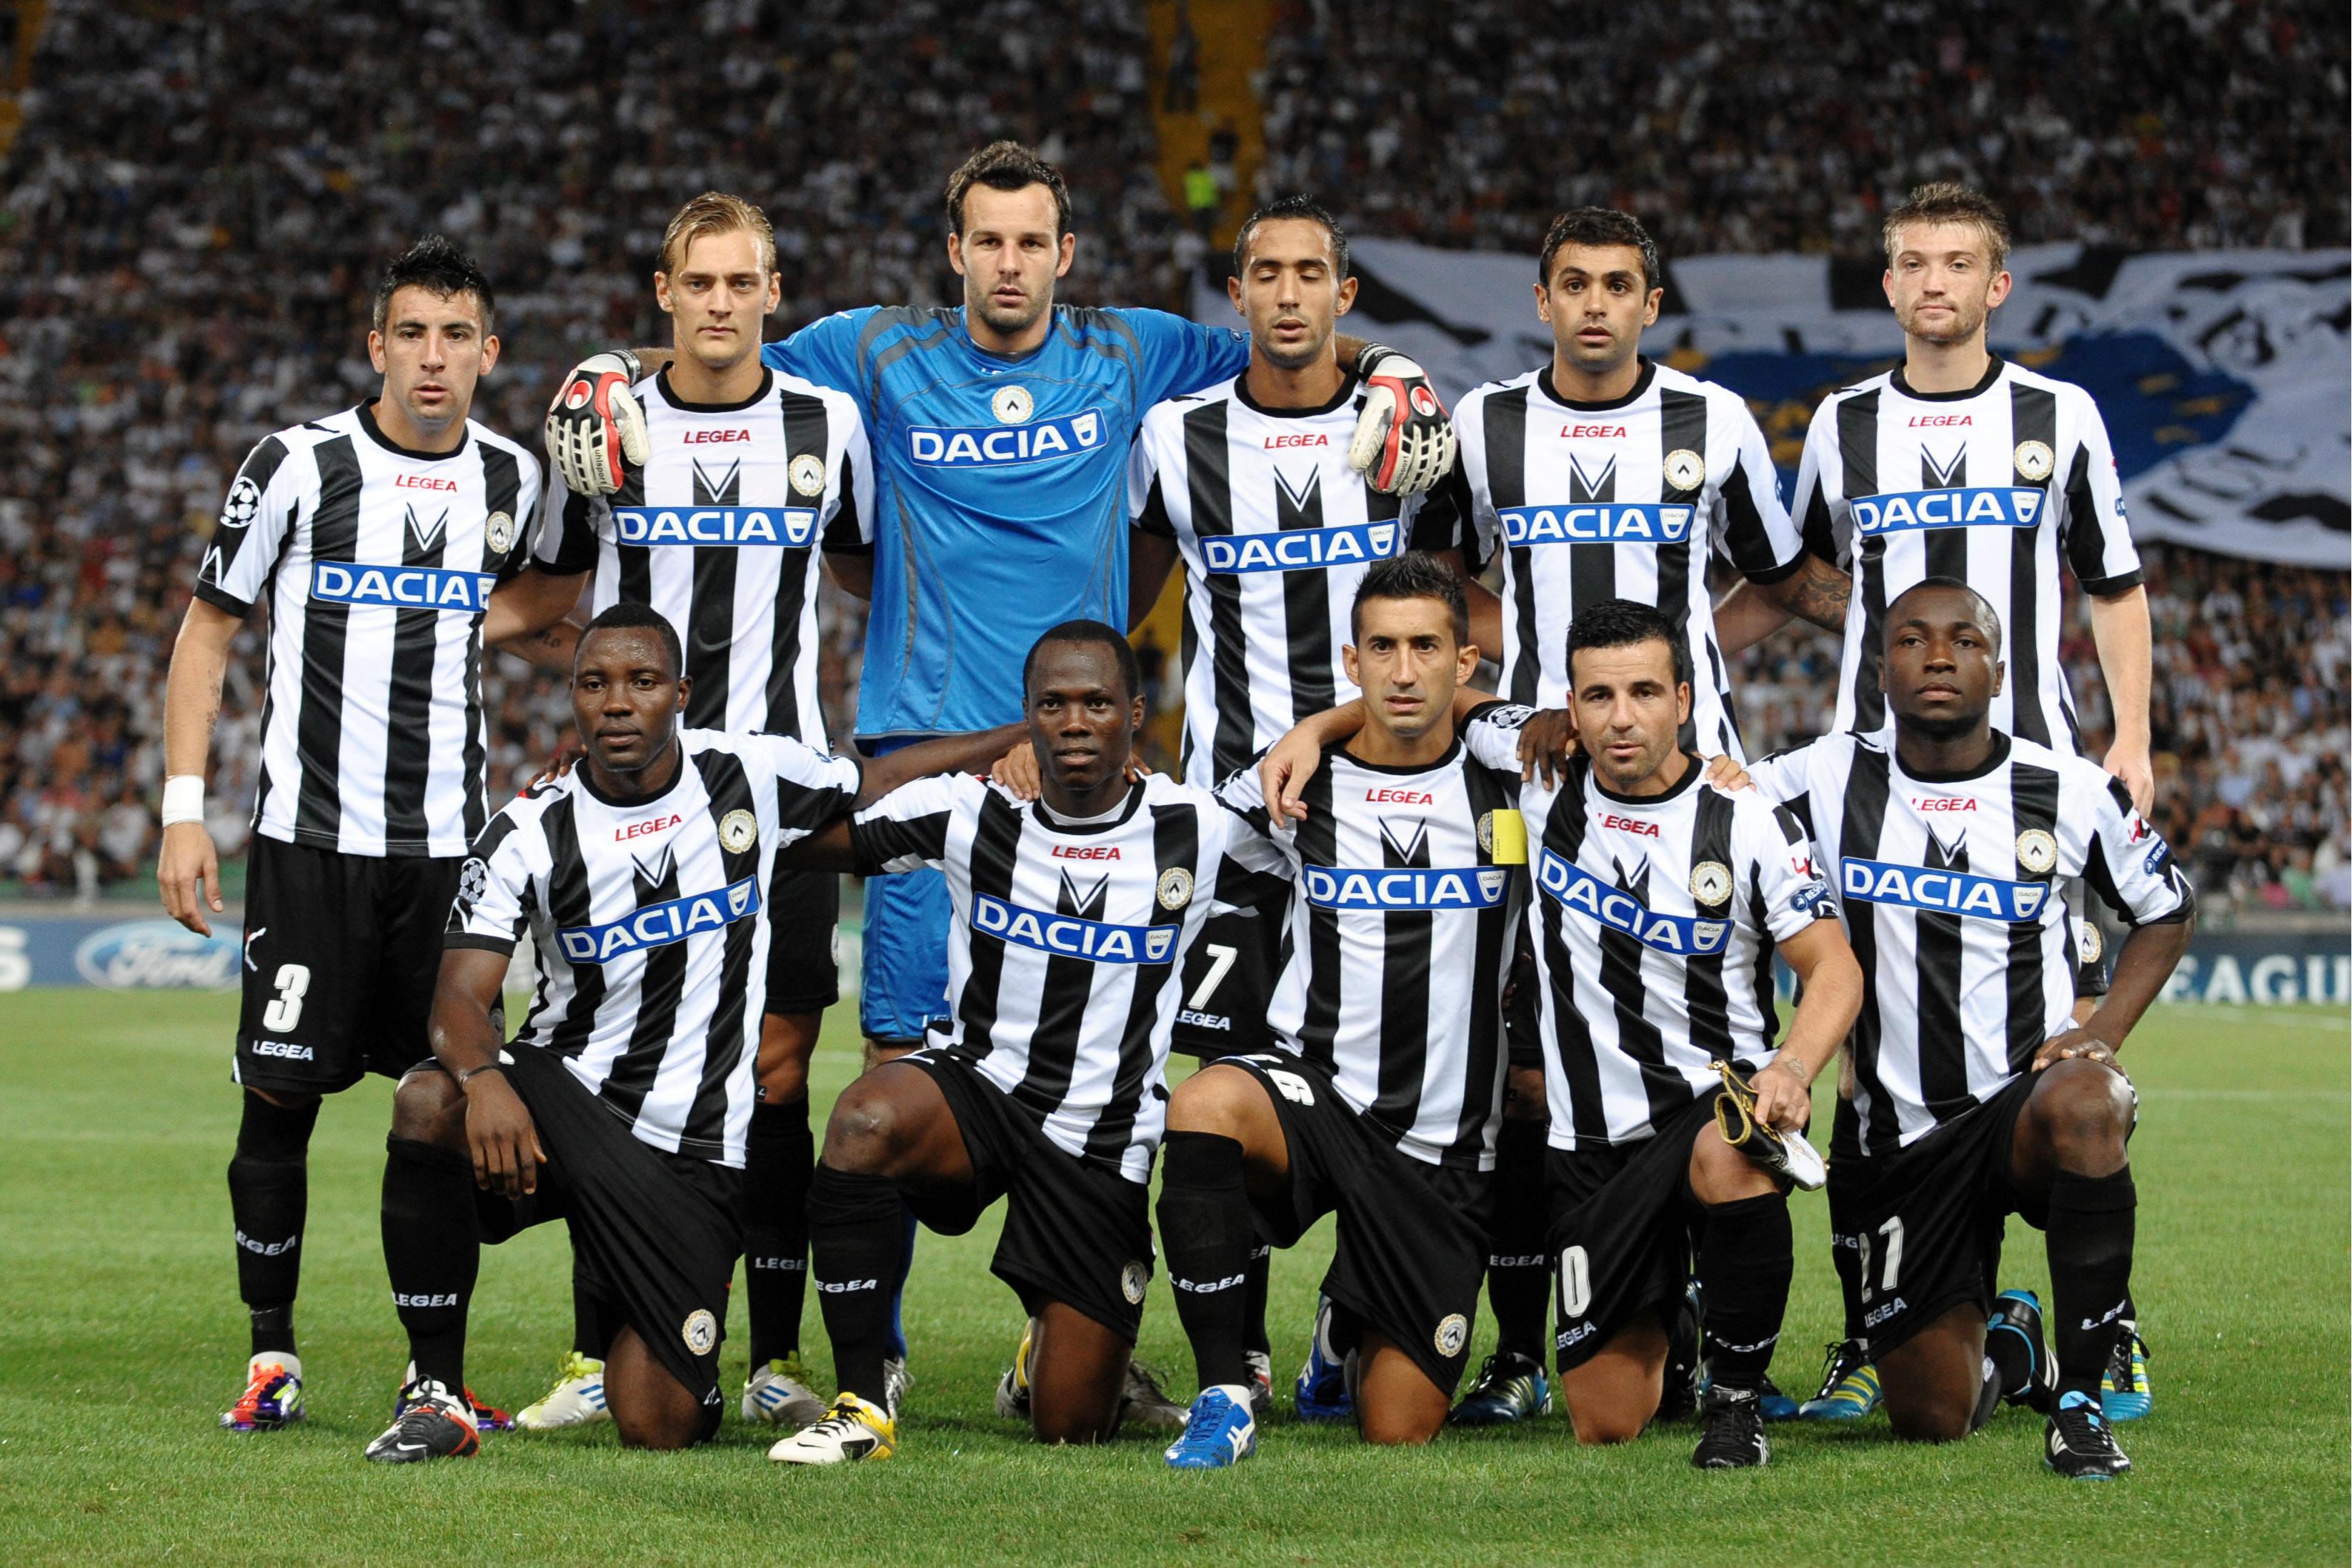 Udinese 2013 wallpaper and image, picture, photo